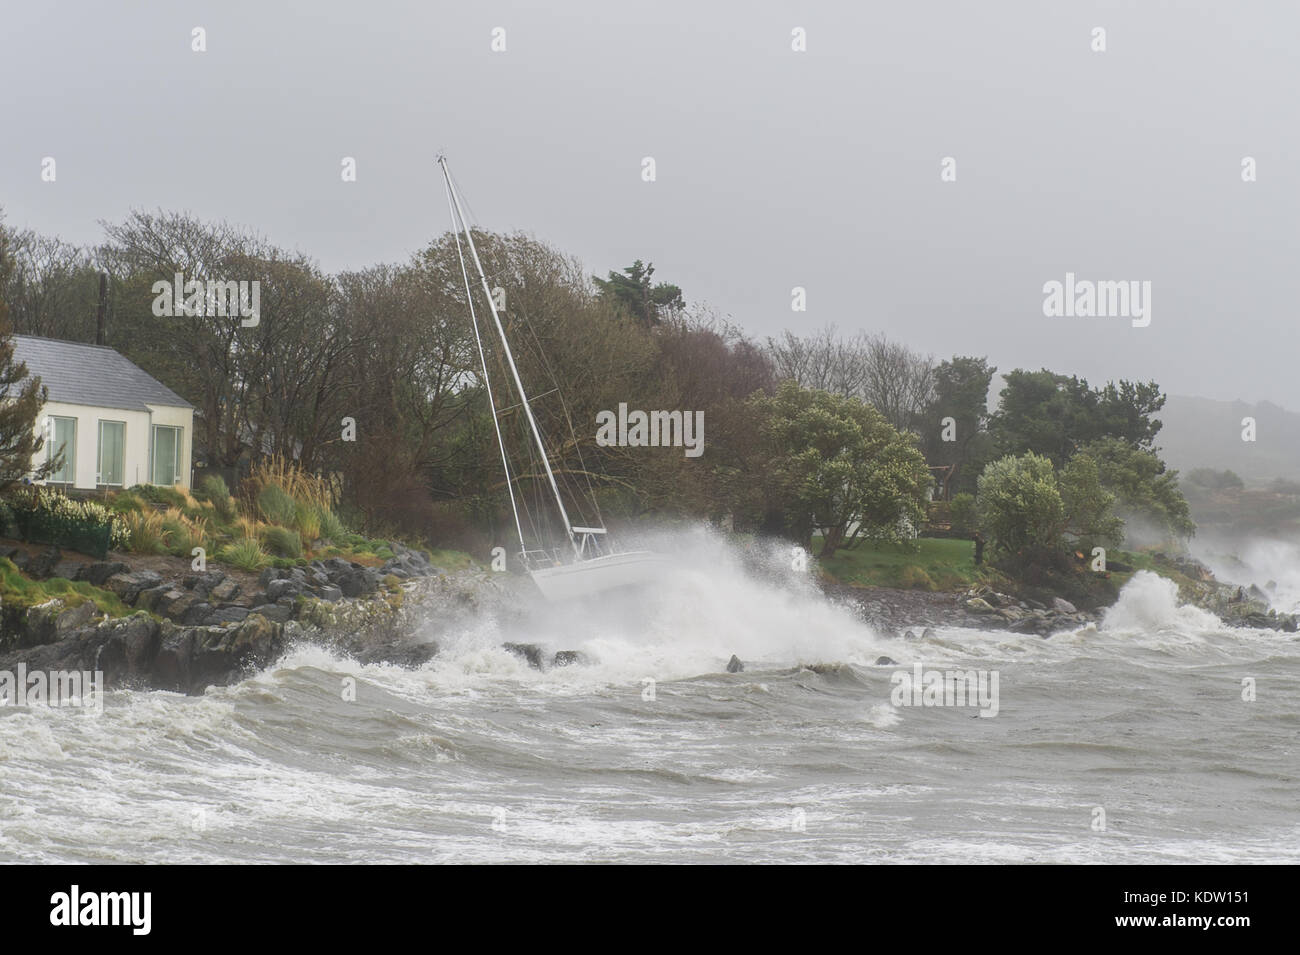 Schull, Ireland 16th Oct, 2017.  Ex-Hurricane Ophelia hits Schull, Ireland with winds of 80kmh and gusts of 130kmh.  Major structural damage is expected as the worst is yet to come. A yacht flounders on rocks after she slipped her moorings due to extremely high winds. Credit: Andy Gibson/Alamy Live News. Stock Photo